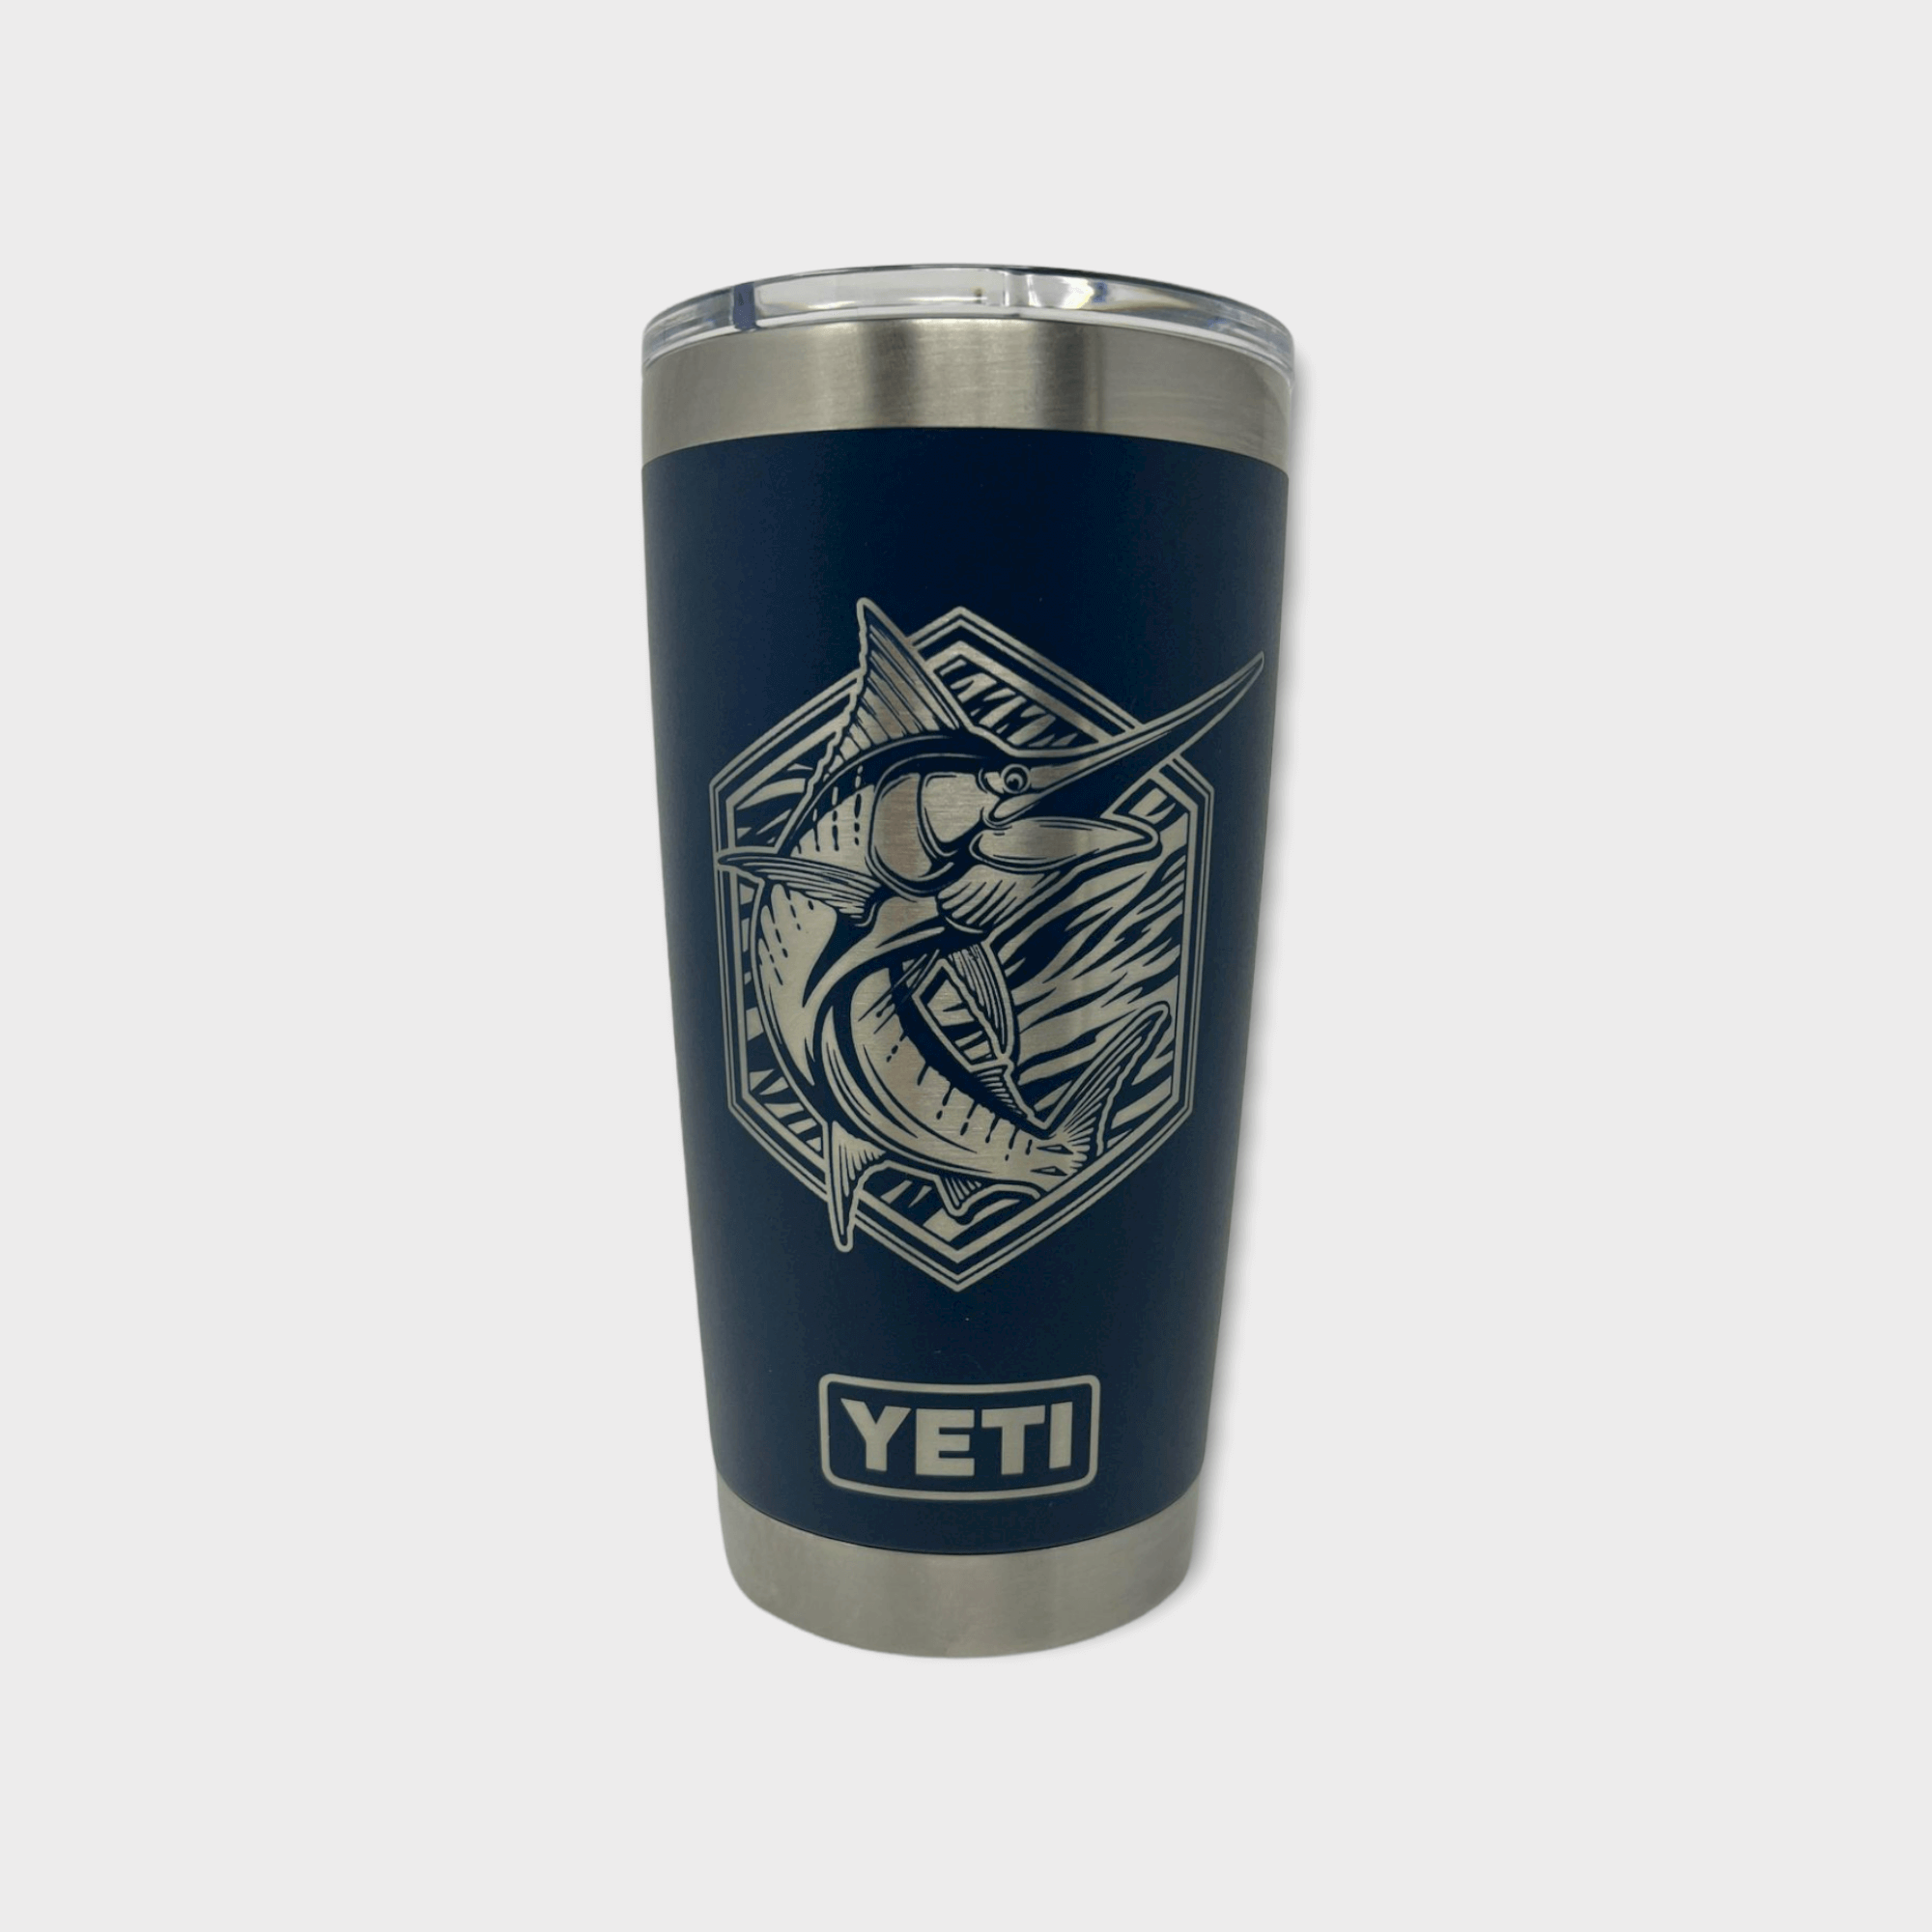 Marlin offshore fishing artwork by Joel Jensen Art laser engraved - silver on black Yeti tumbler with white background in photo.  Wind River Outpost.